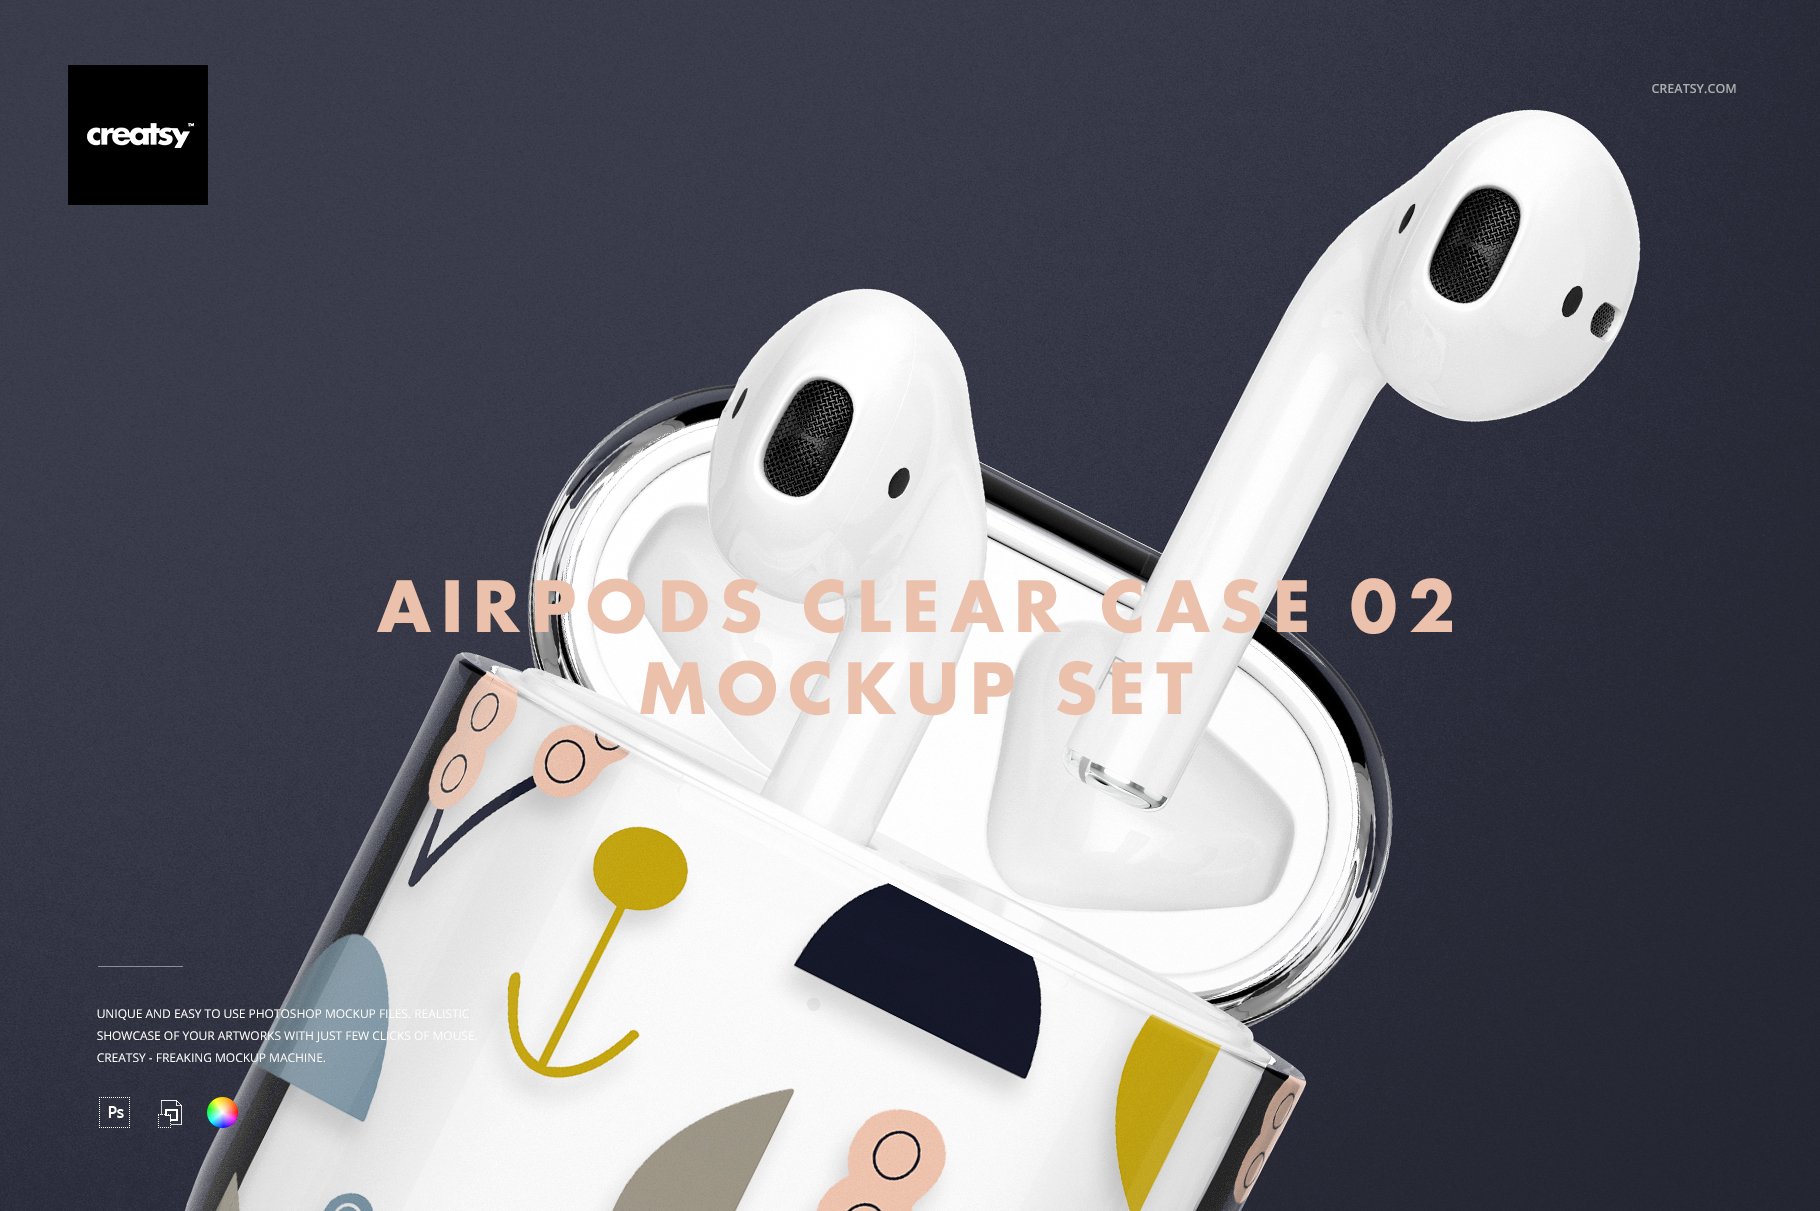 AirPods Clear Case Mockup Set 02 cover image.